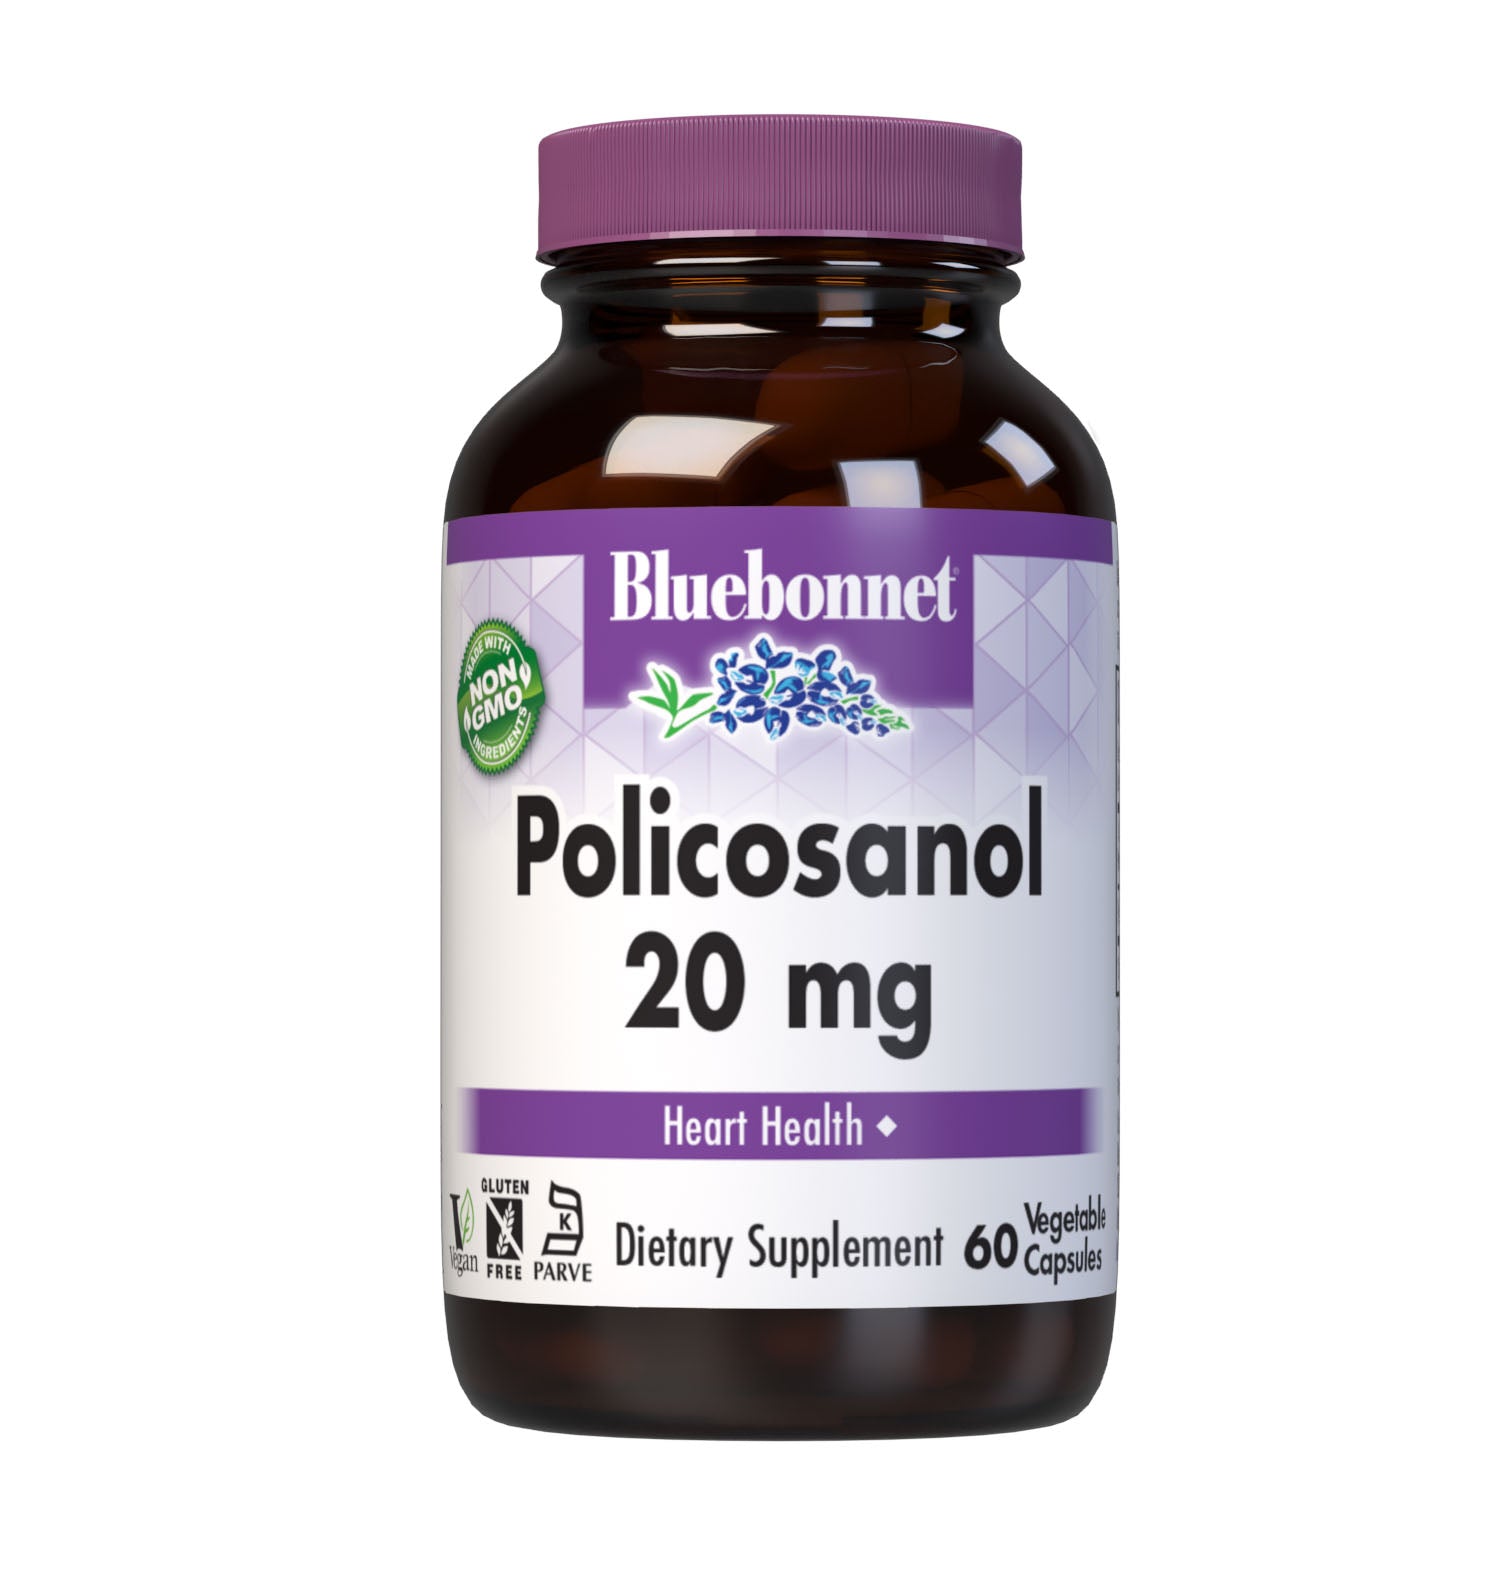 Bluebonnet’s Policosanol 20 mg 60 Vegetable Capsules contain a mixture of 85% aliphatic alcohols derived from non-GMO sugarcane wax that support healthy cholesterol levels that are already within the normal range.  #size_60 count